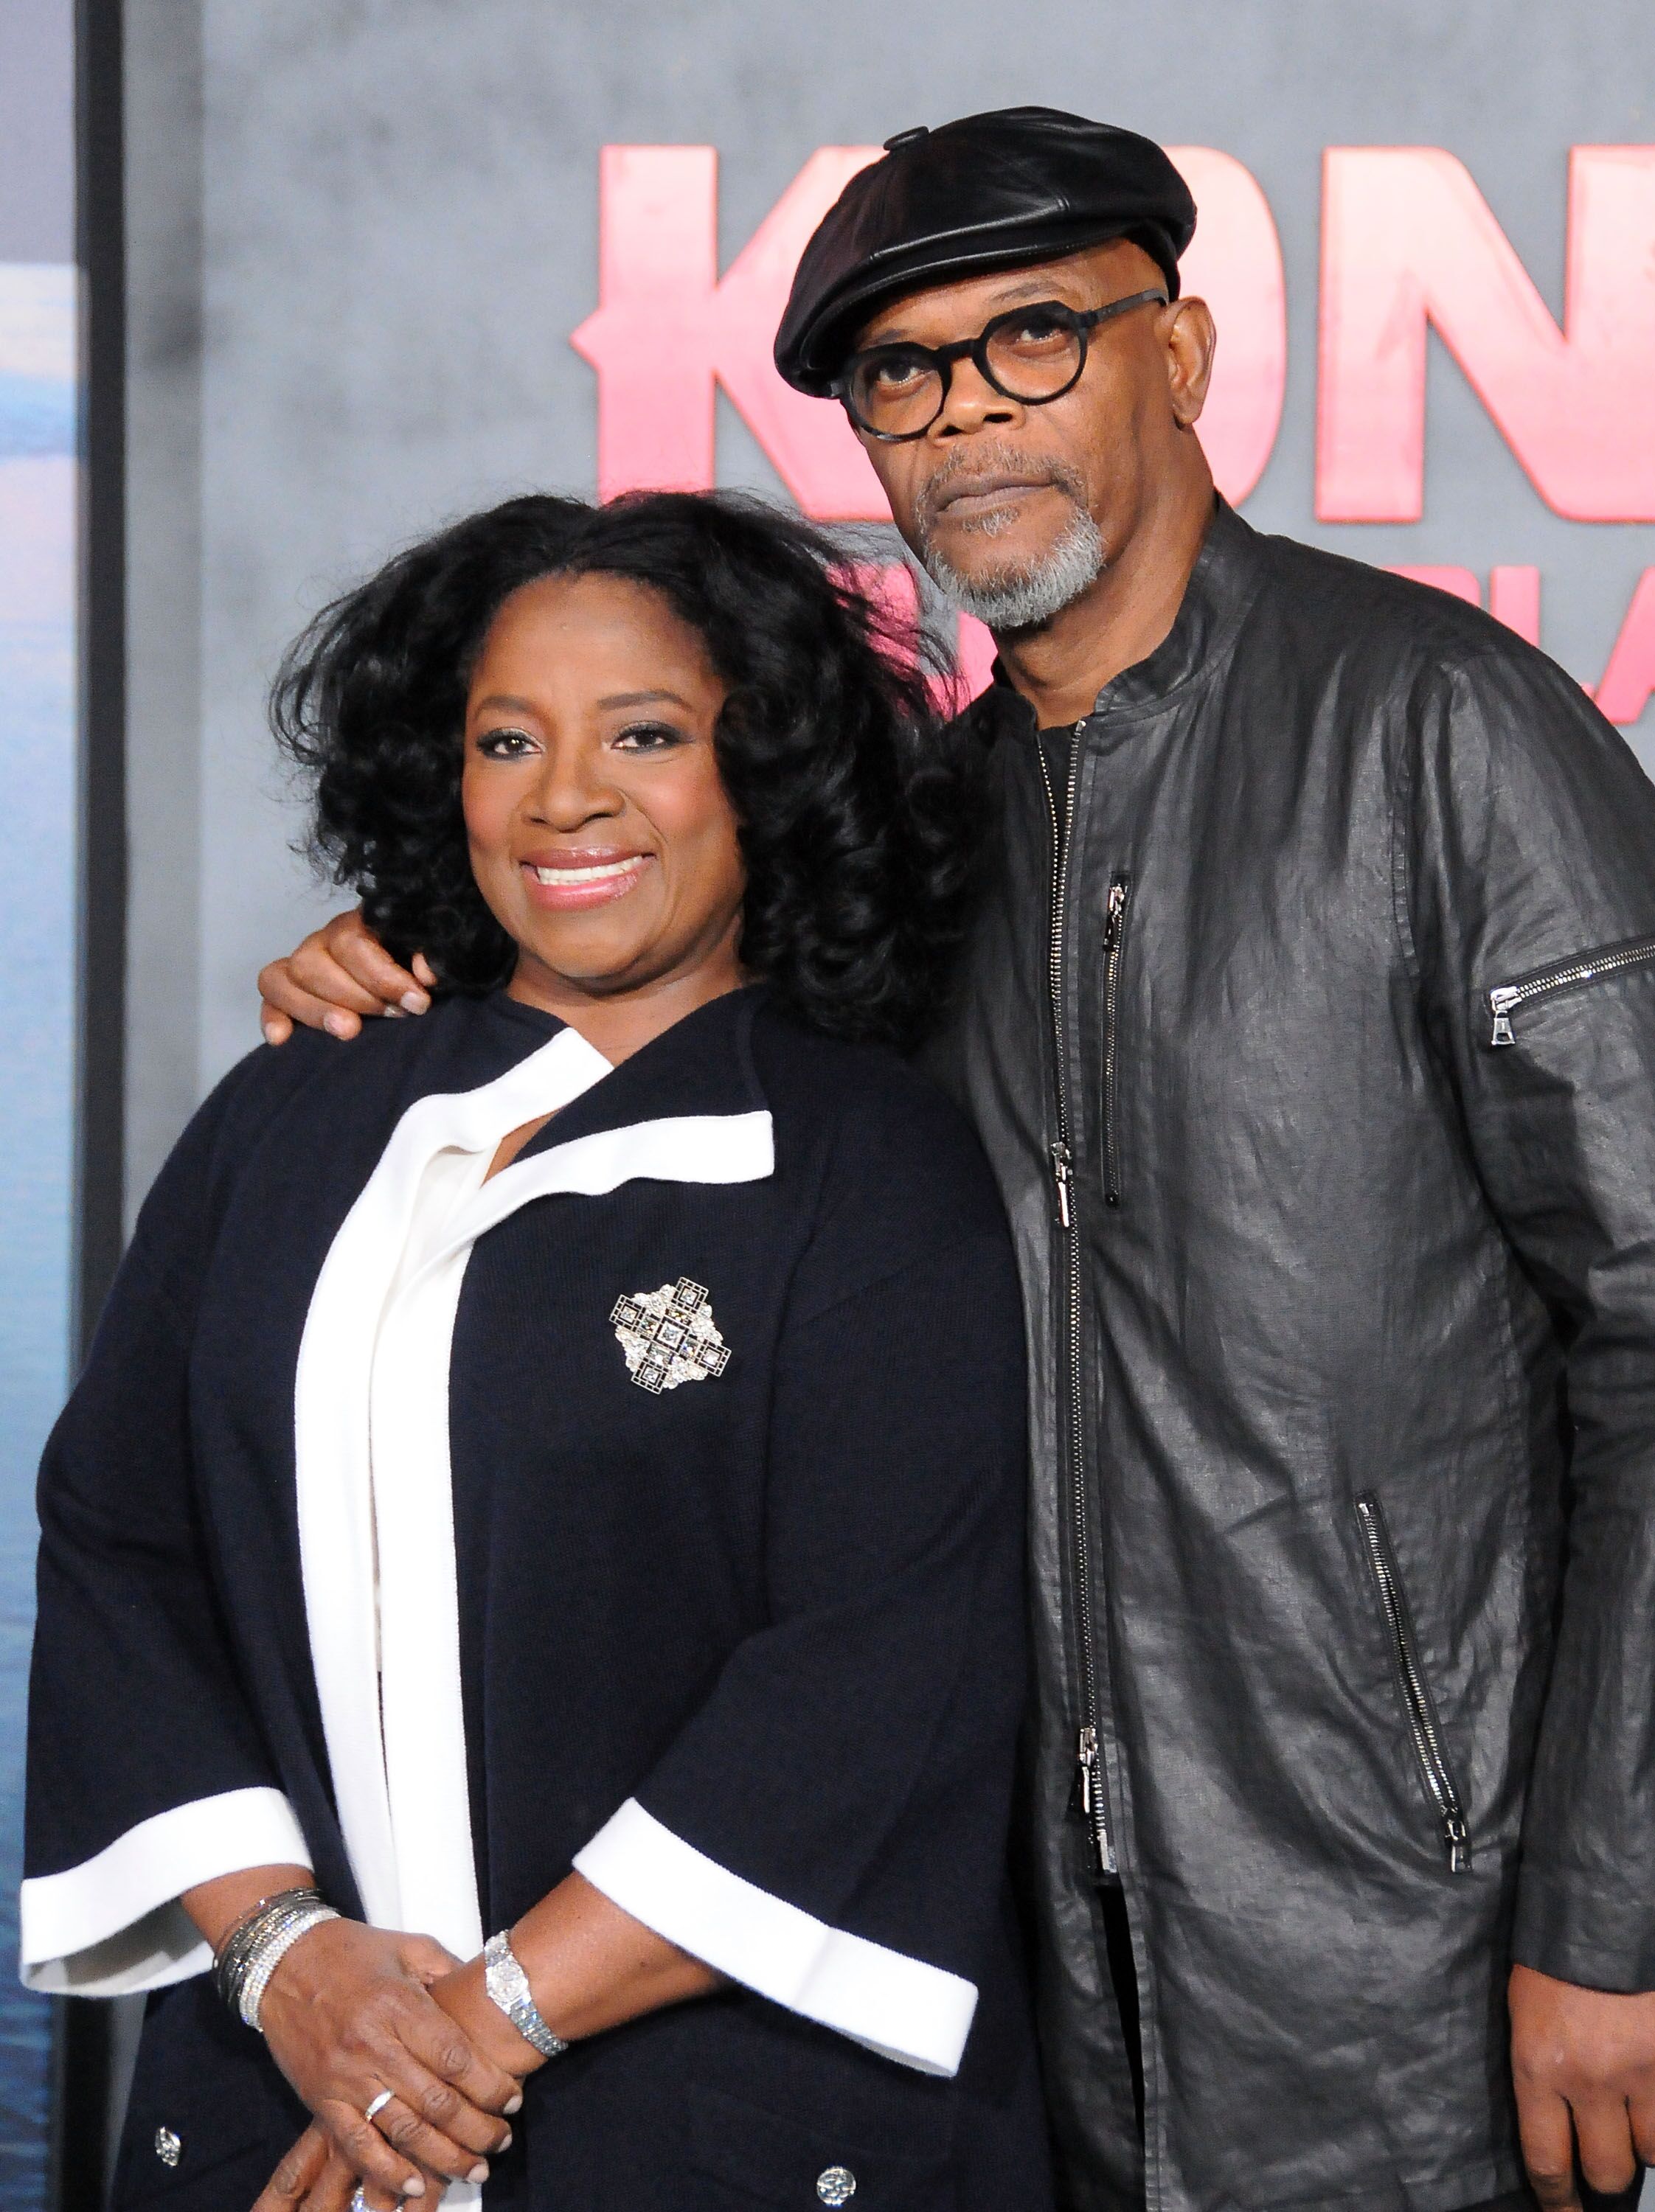 Samuel L. Jackson (R) and wife LaTanya Richardson (L) arrive for the Premiere of Warner Bros. Pictures' 'Kong: Skull Island' at Dolby Theatre on March 8, 2017 in Hollywood, California | Photo: Getty Images 